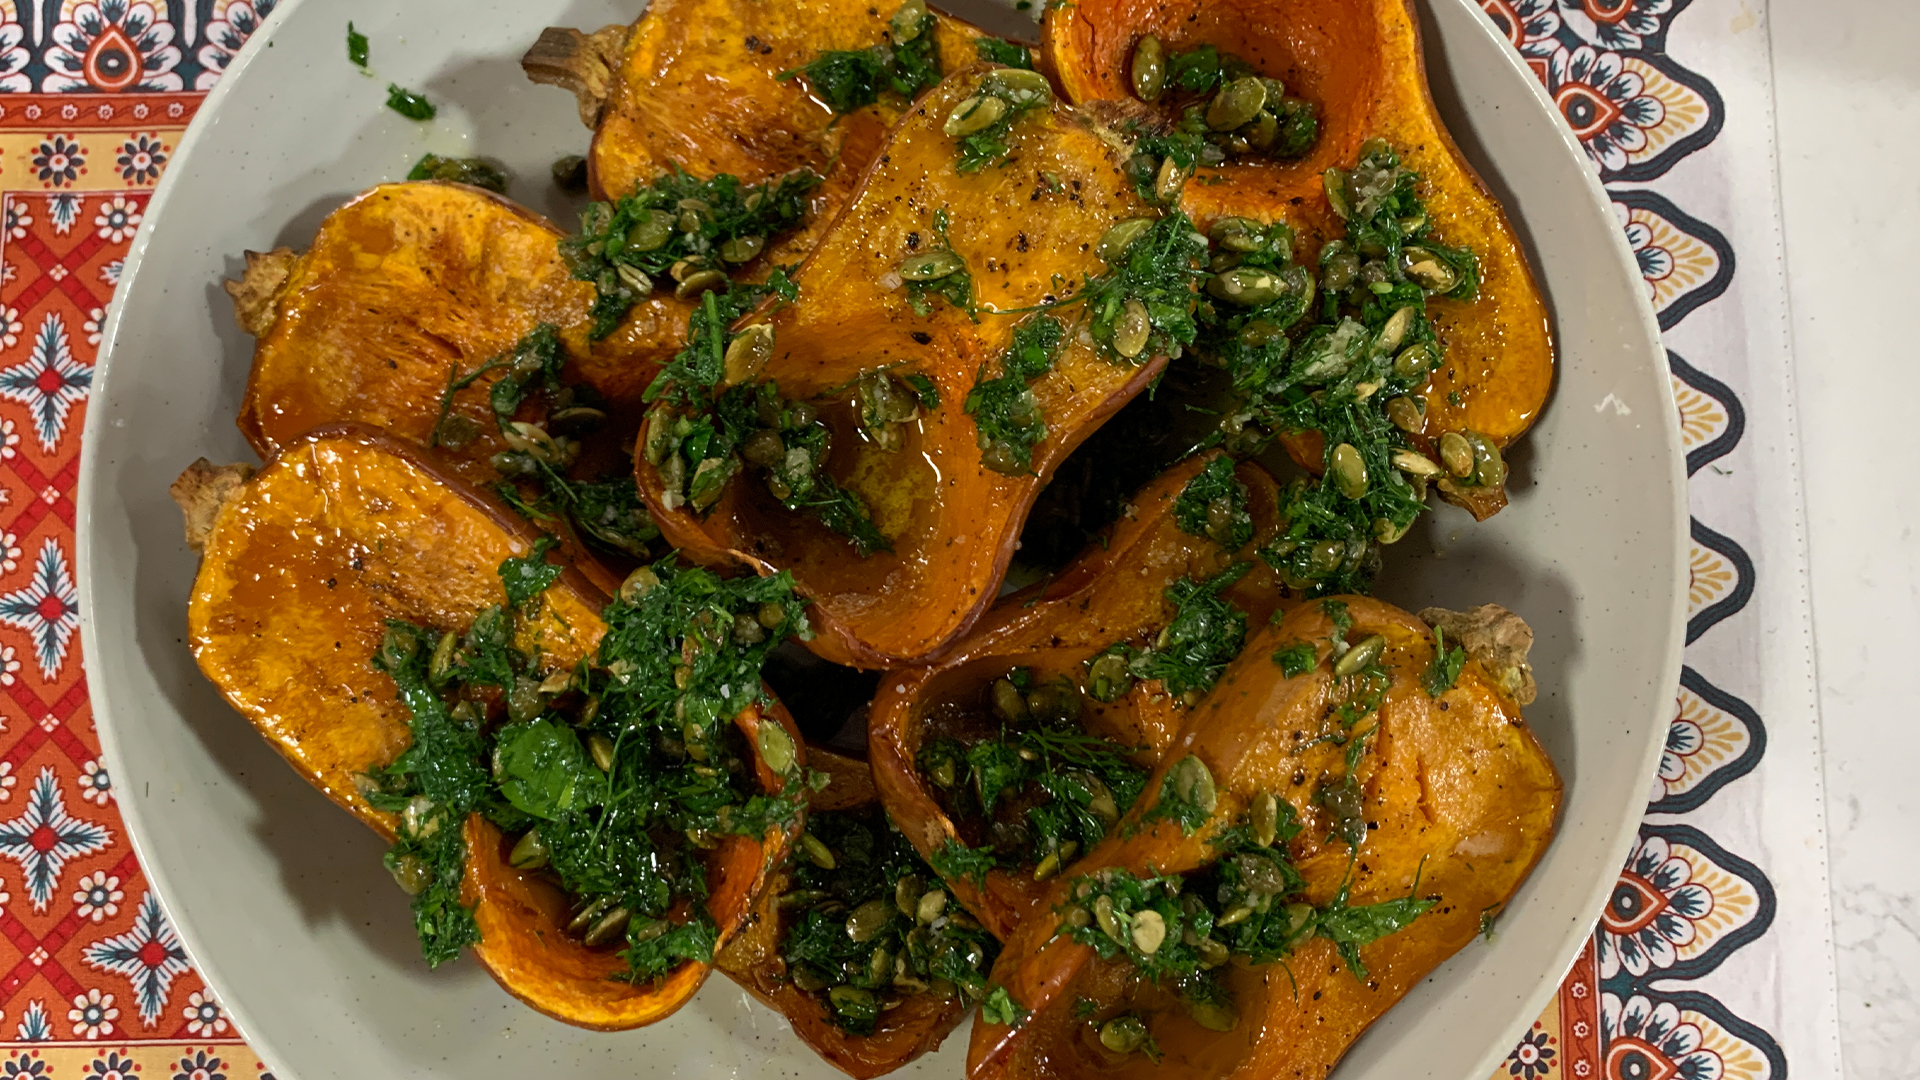 Roasted honey nut squash with a caper and pumpkin seed gremolata